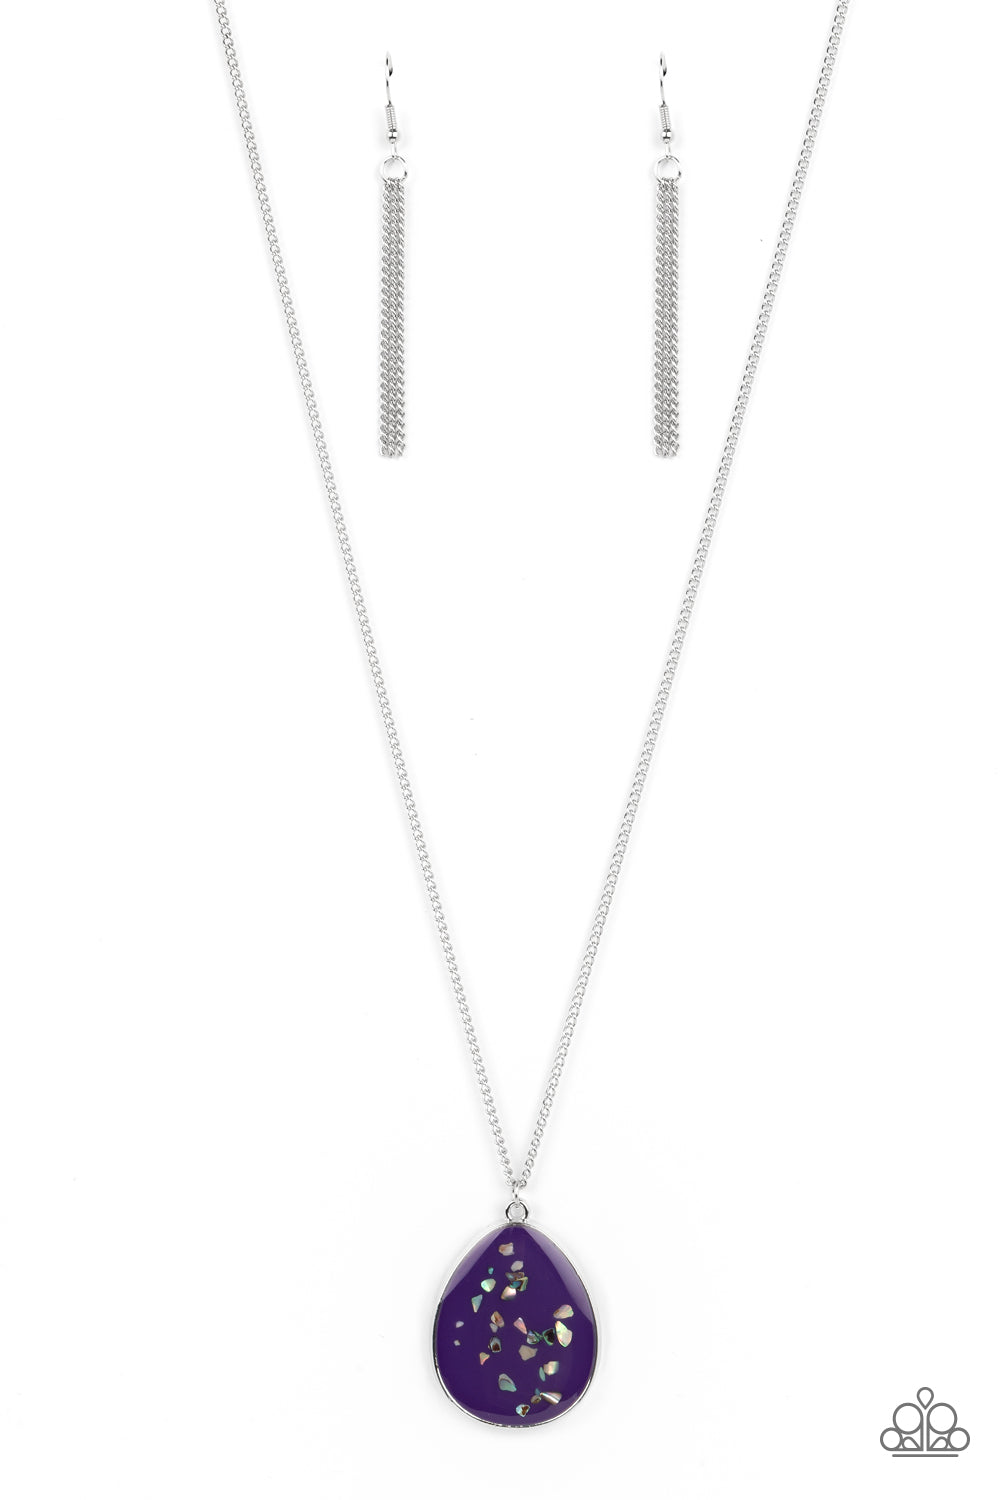 Shimmering Seafloors Paparazzi Accessories Necklace with Earrings Purple